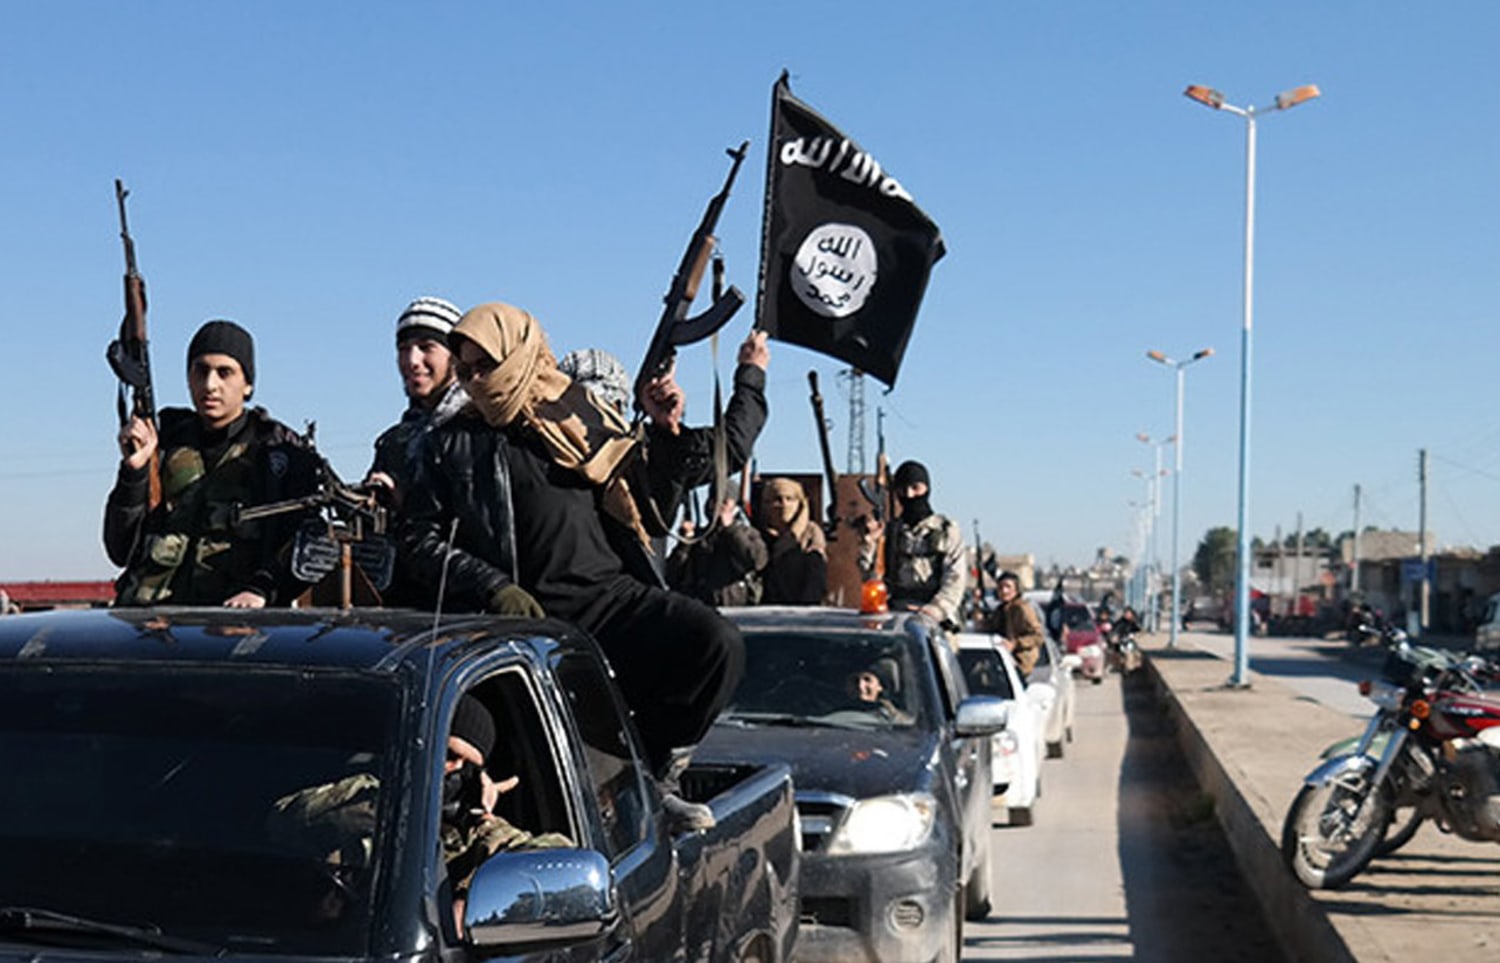 Group claiming ties to Islamic State appear to have hacked key